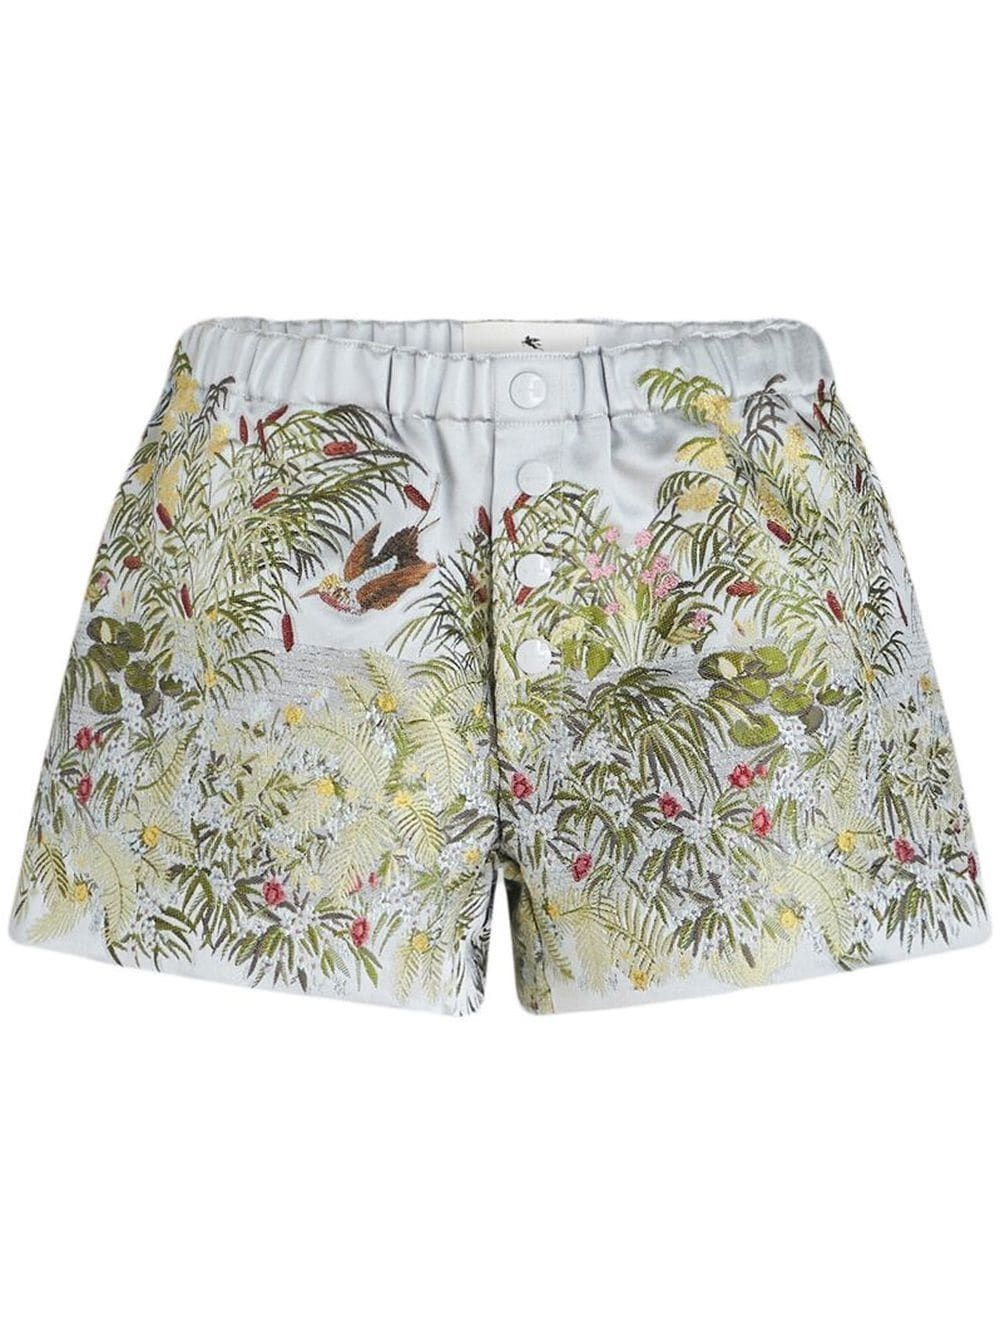 embroidered satin shorts - 1